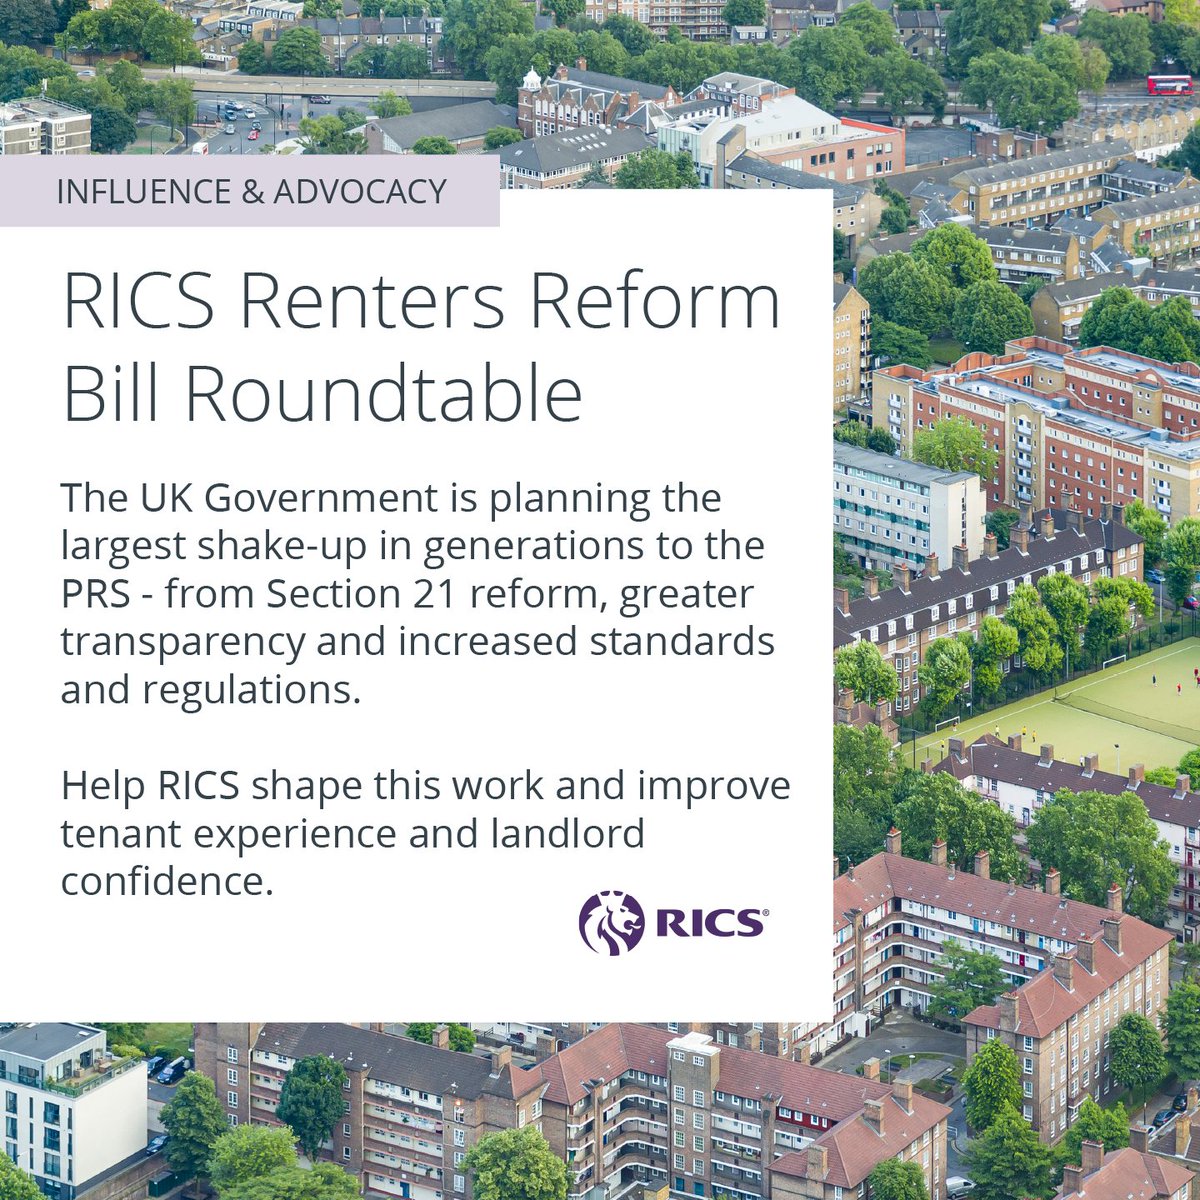 English Private Rented Sector reforms are some of the most ambitious changes in years. RICS is working to ensure the proposals increase tenant quality and affordability while giving landlords confidence to remain in the market. Join us to shape the work. surveymonkey.co.uk/r/FHPY7C9